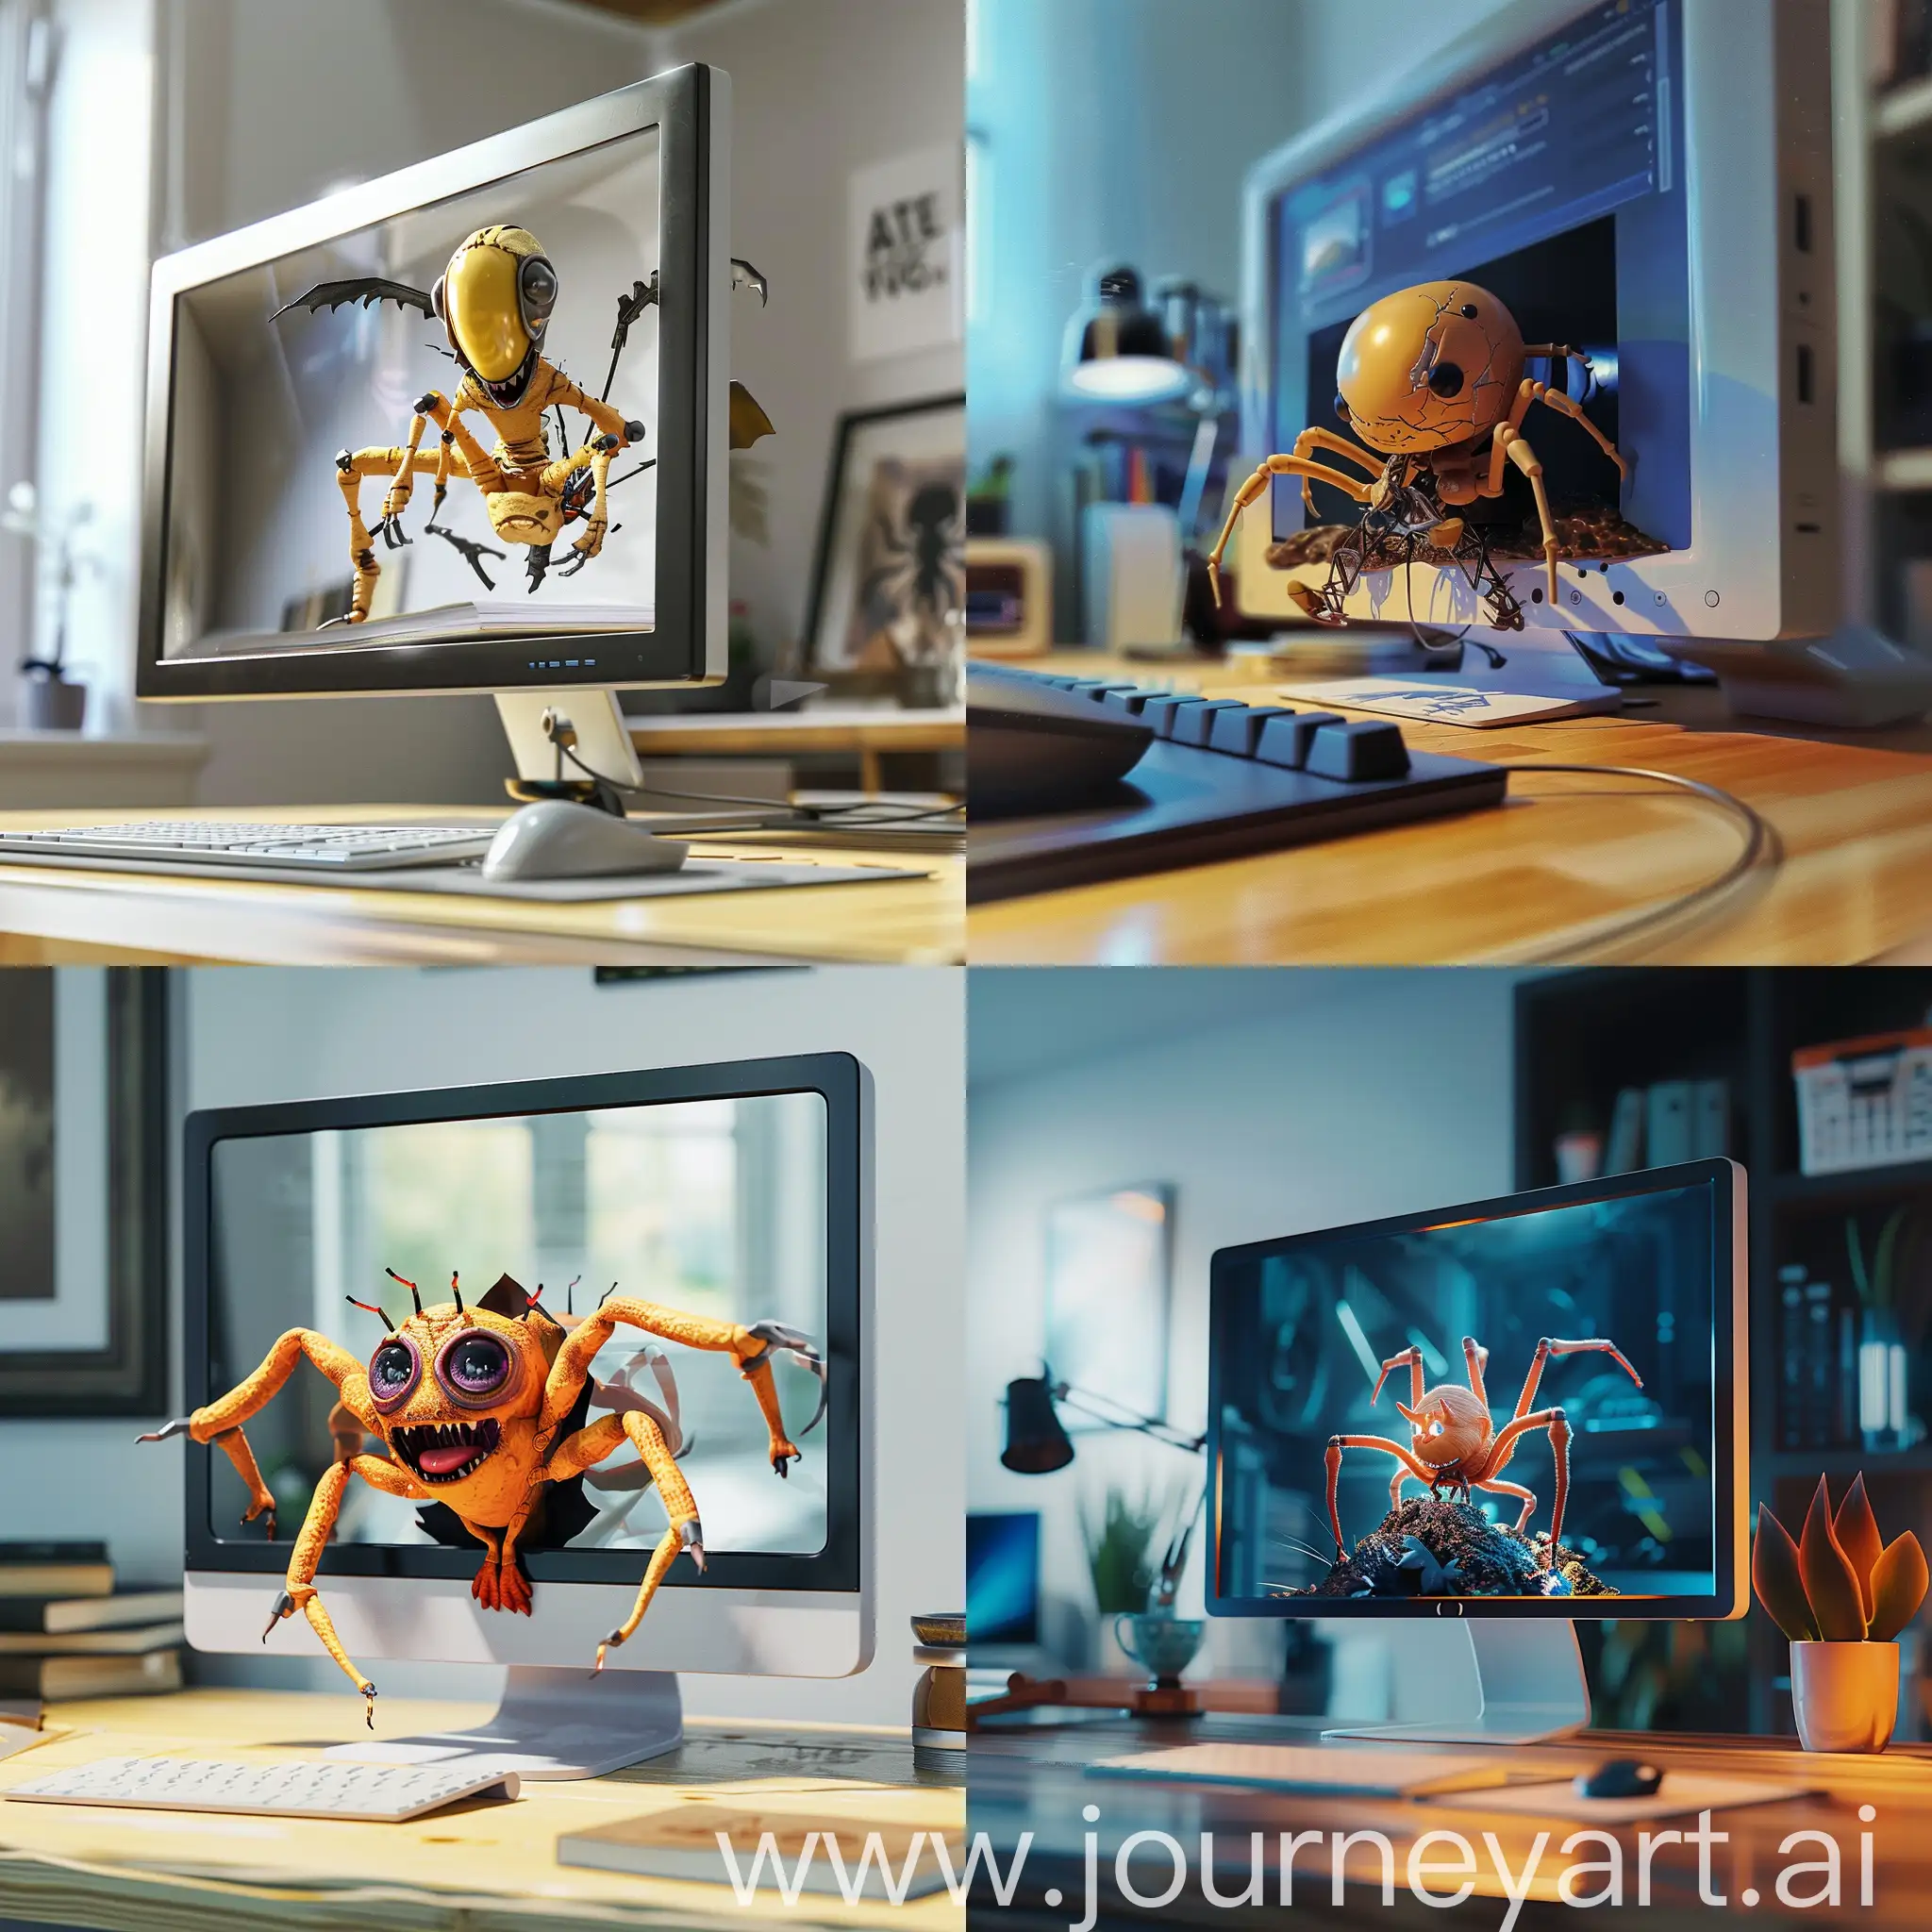 Computer-Game-Character-Emerges-from-Screen-onto-Desk